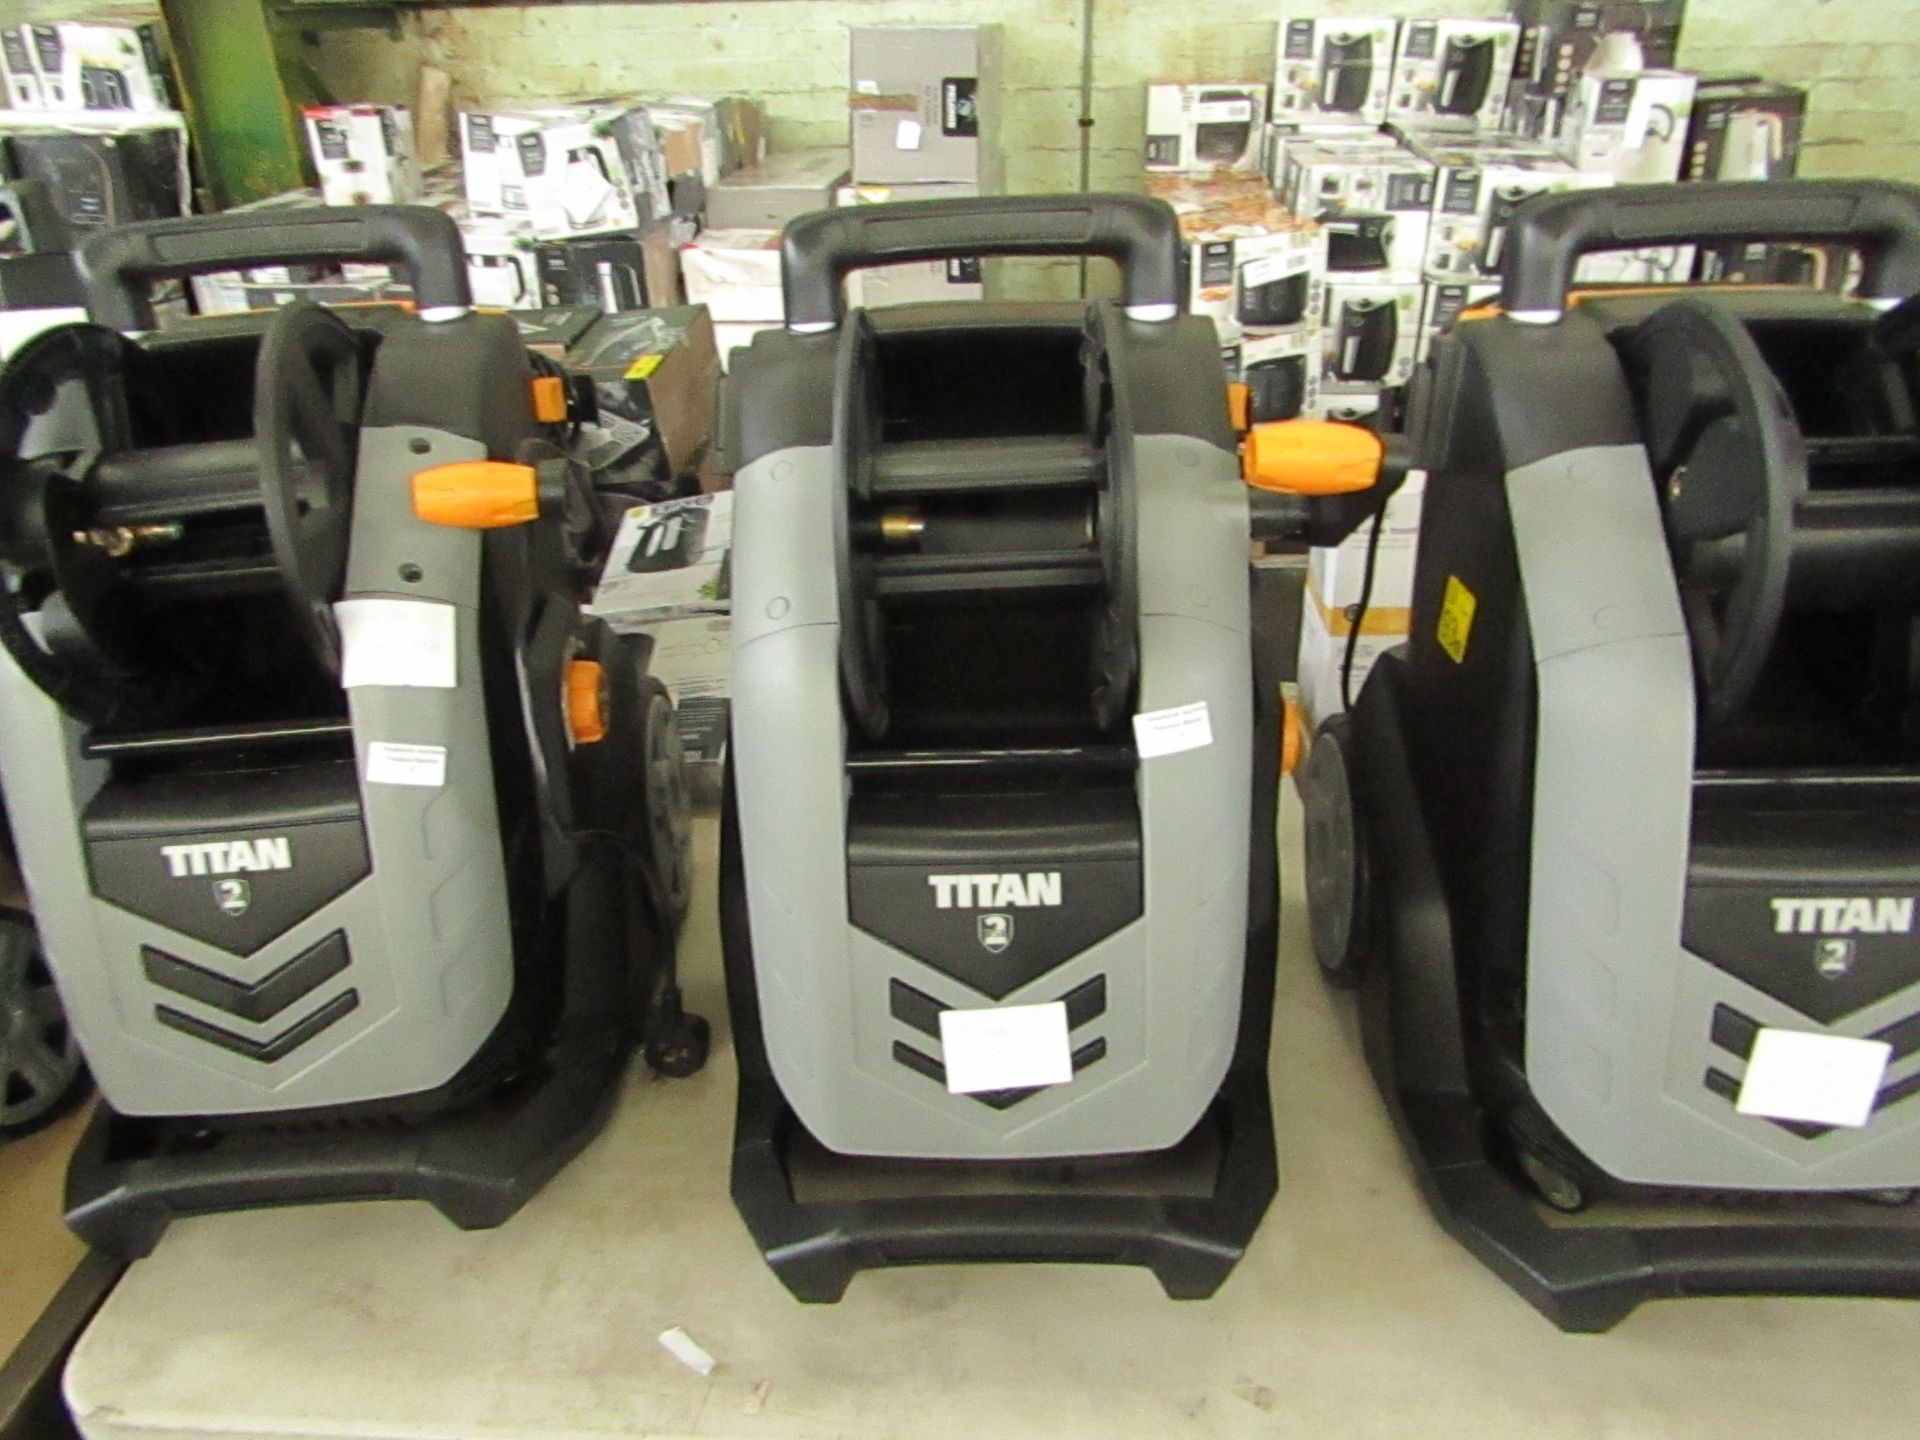 Titan - 2200w Corded High Pressure Washer - TTB2200PRW-DSS - Item Powers On - Please Note No